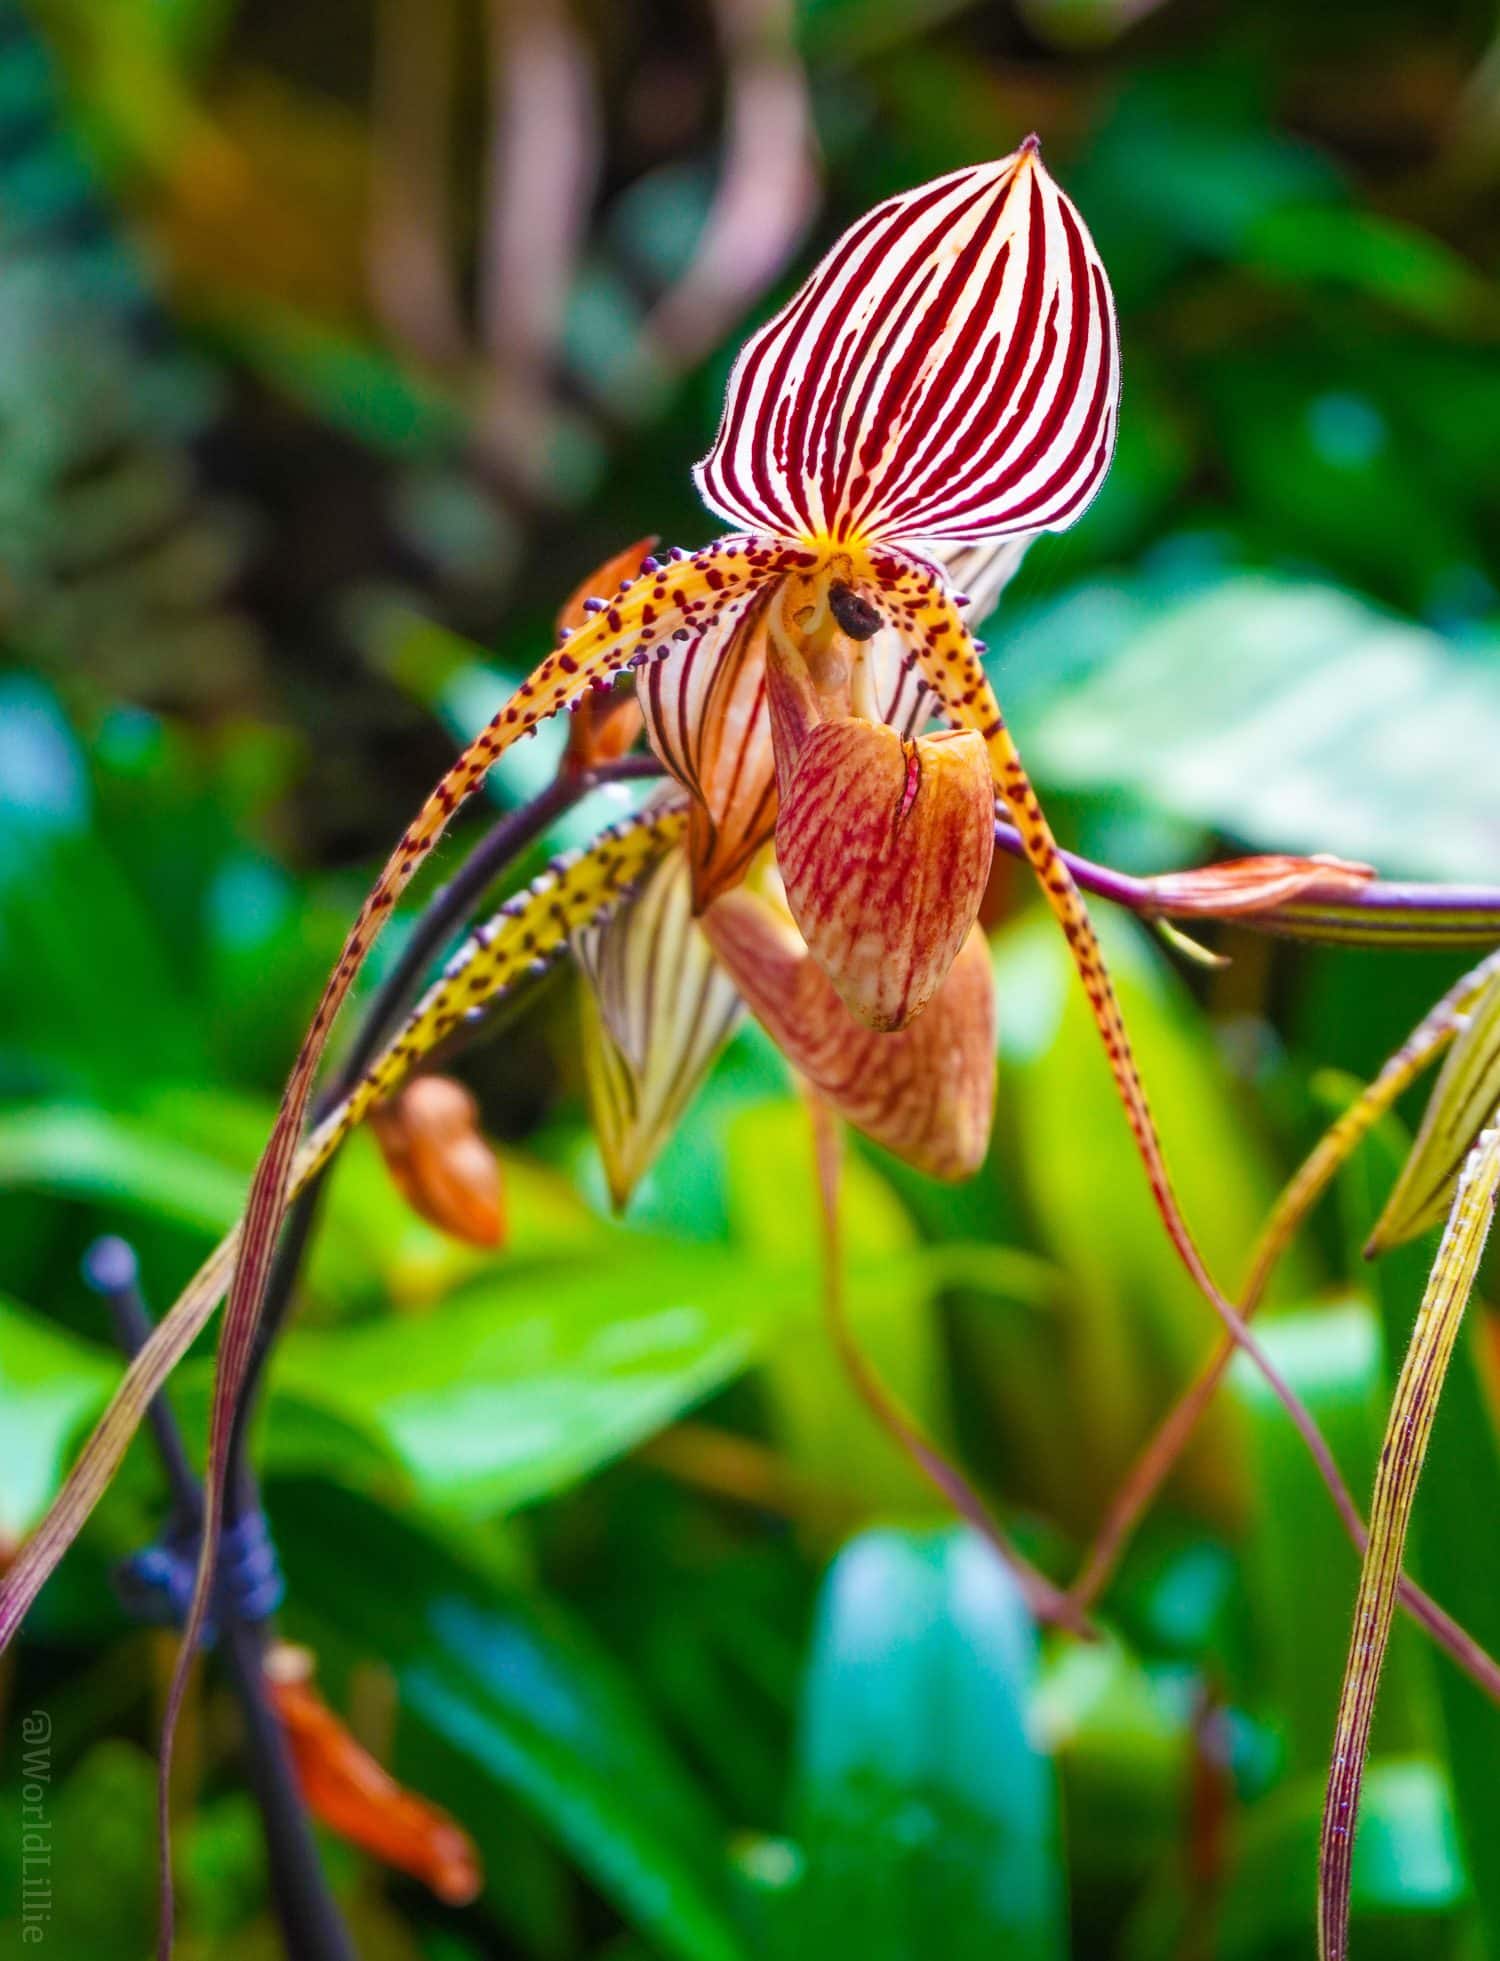 What a wonderful animal-like orchid.